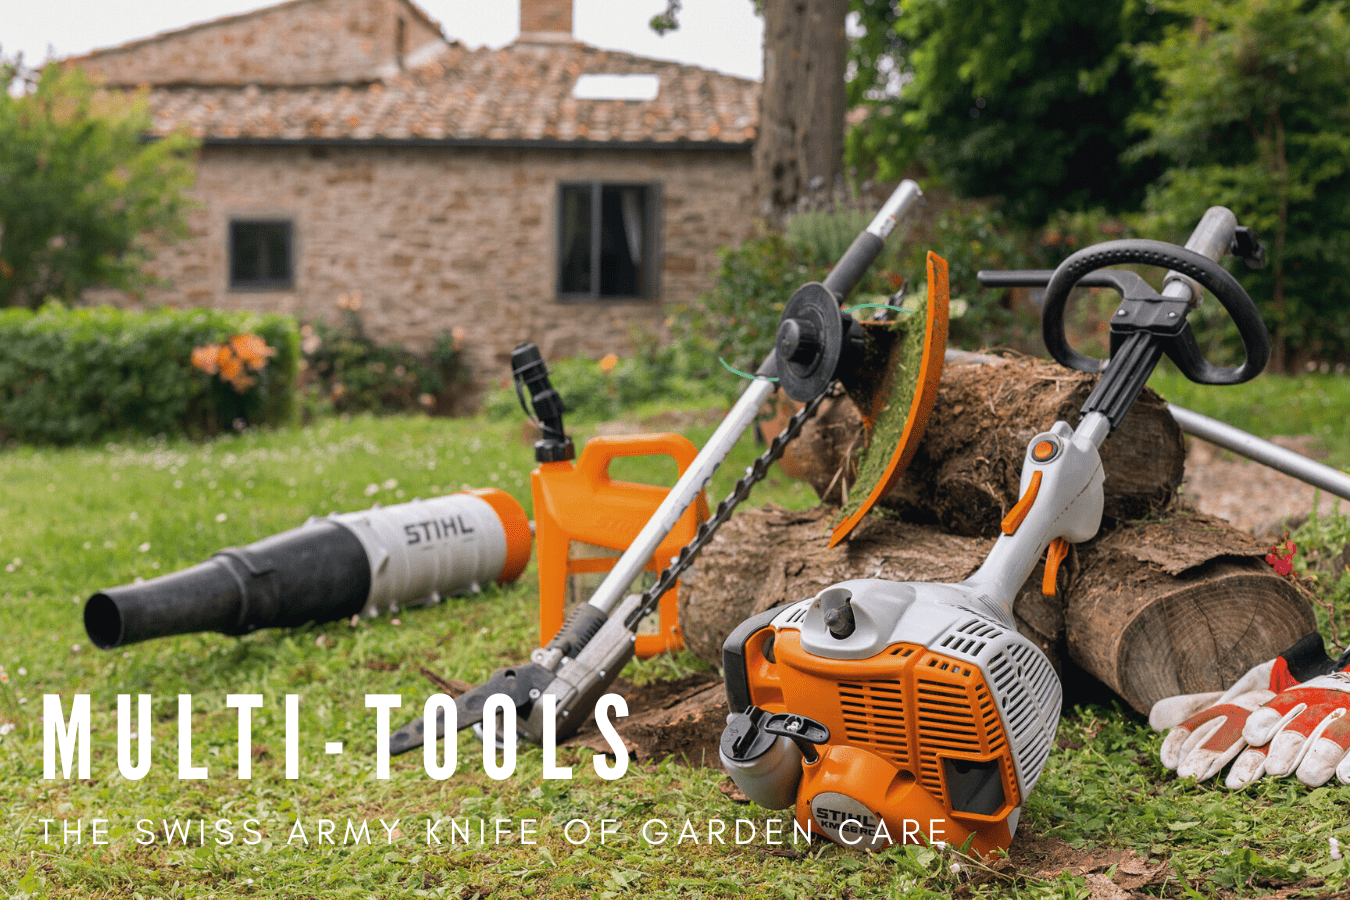 Multi-tools, The swiss army knife of garden care.